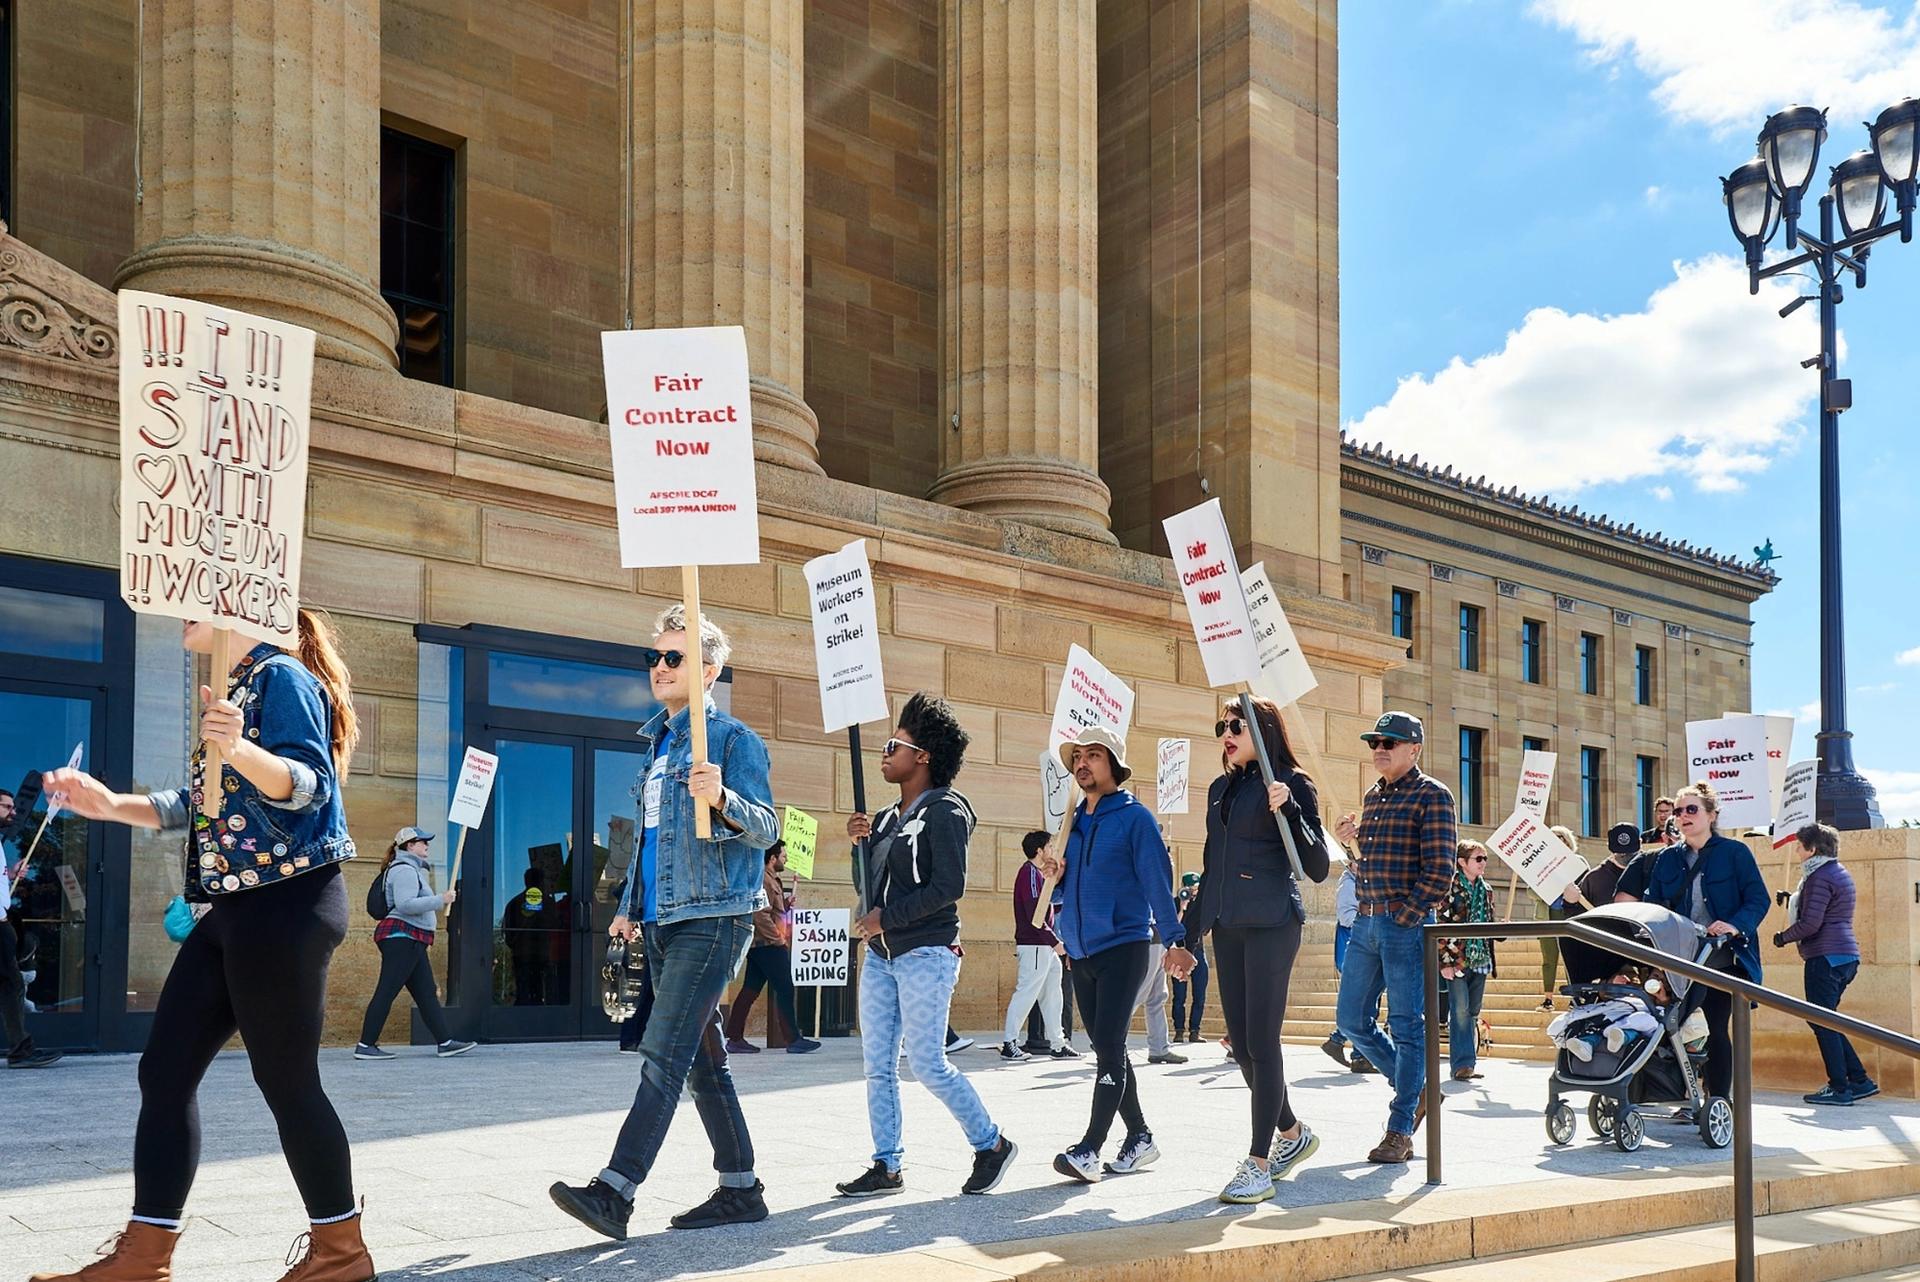 Union workers demonstrate outside the Philadelphia Museum of Art Photo by Tim Tiebout